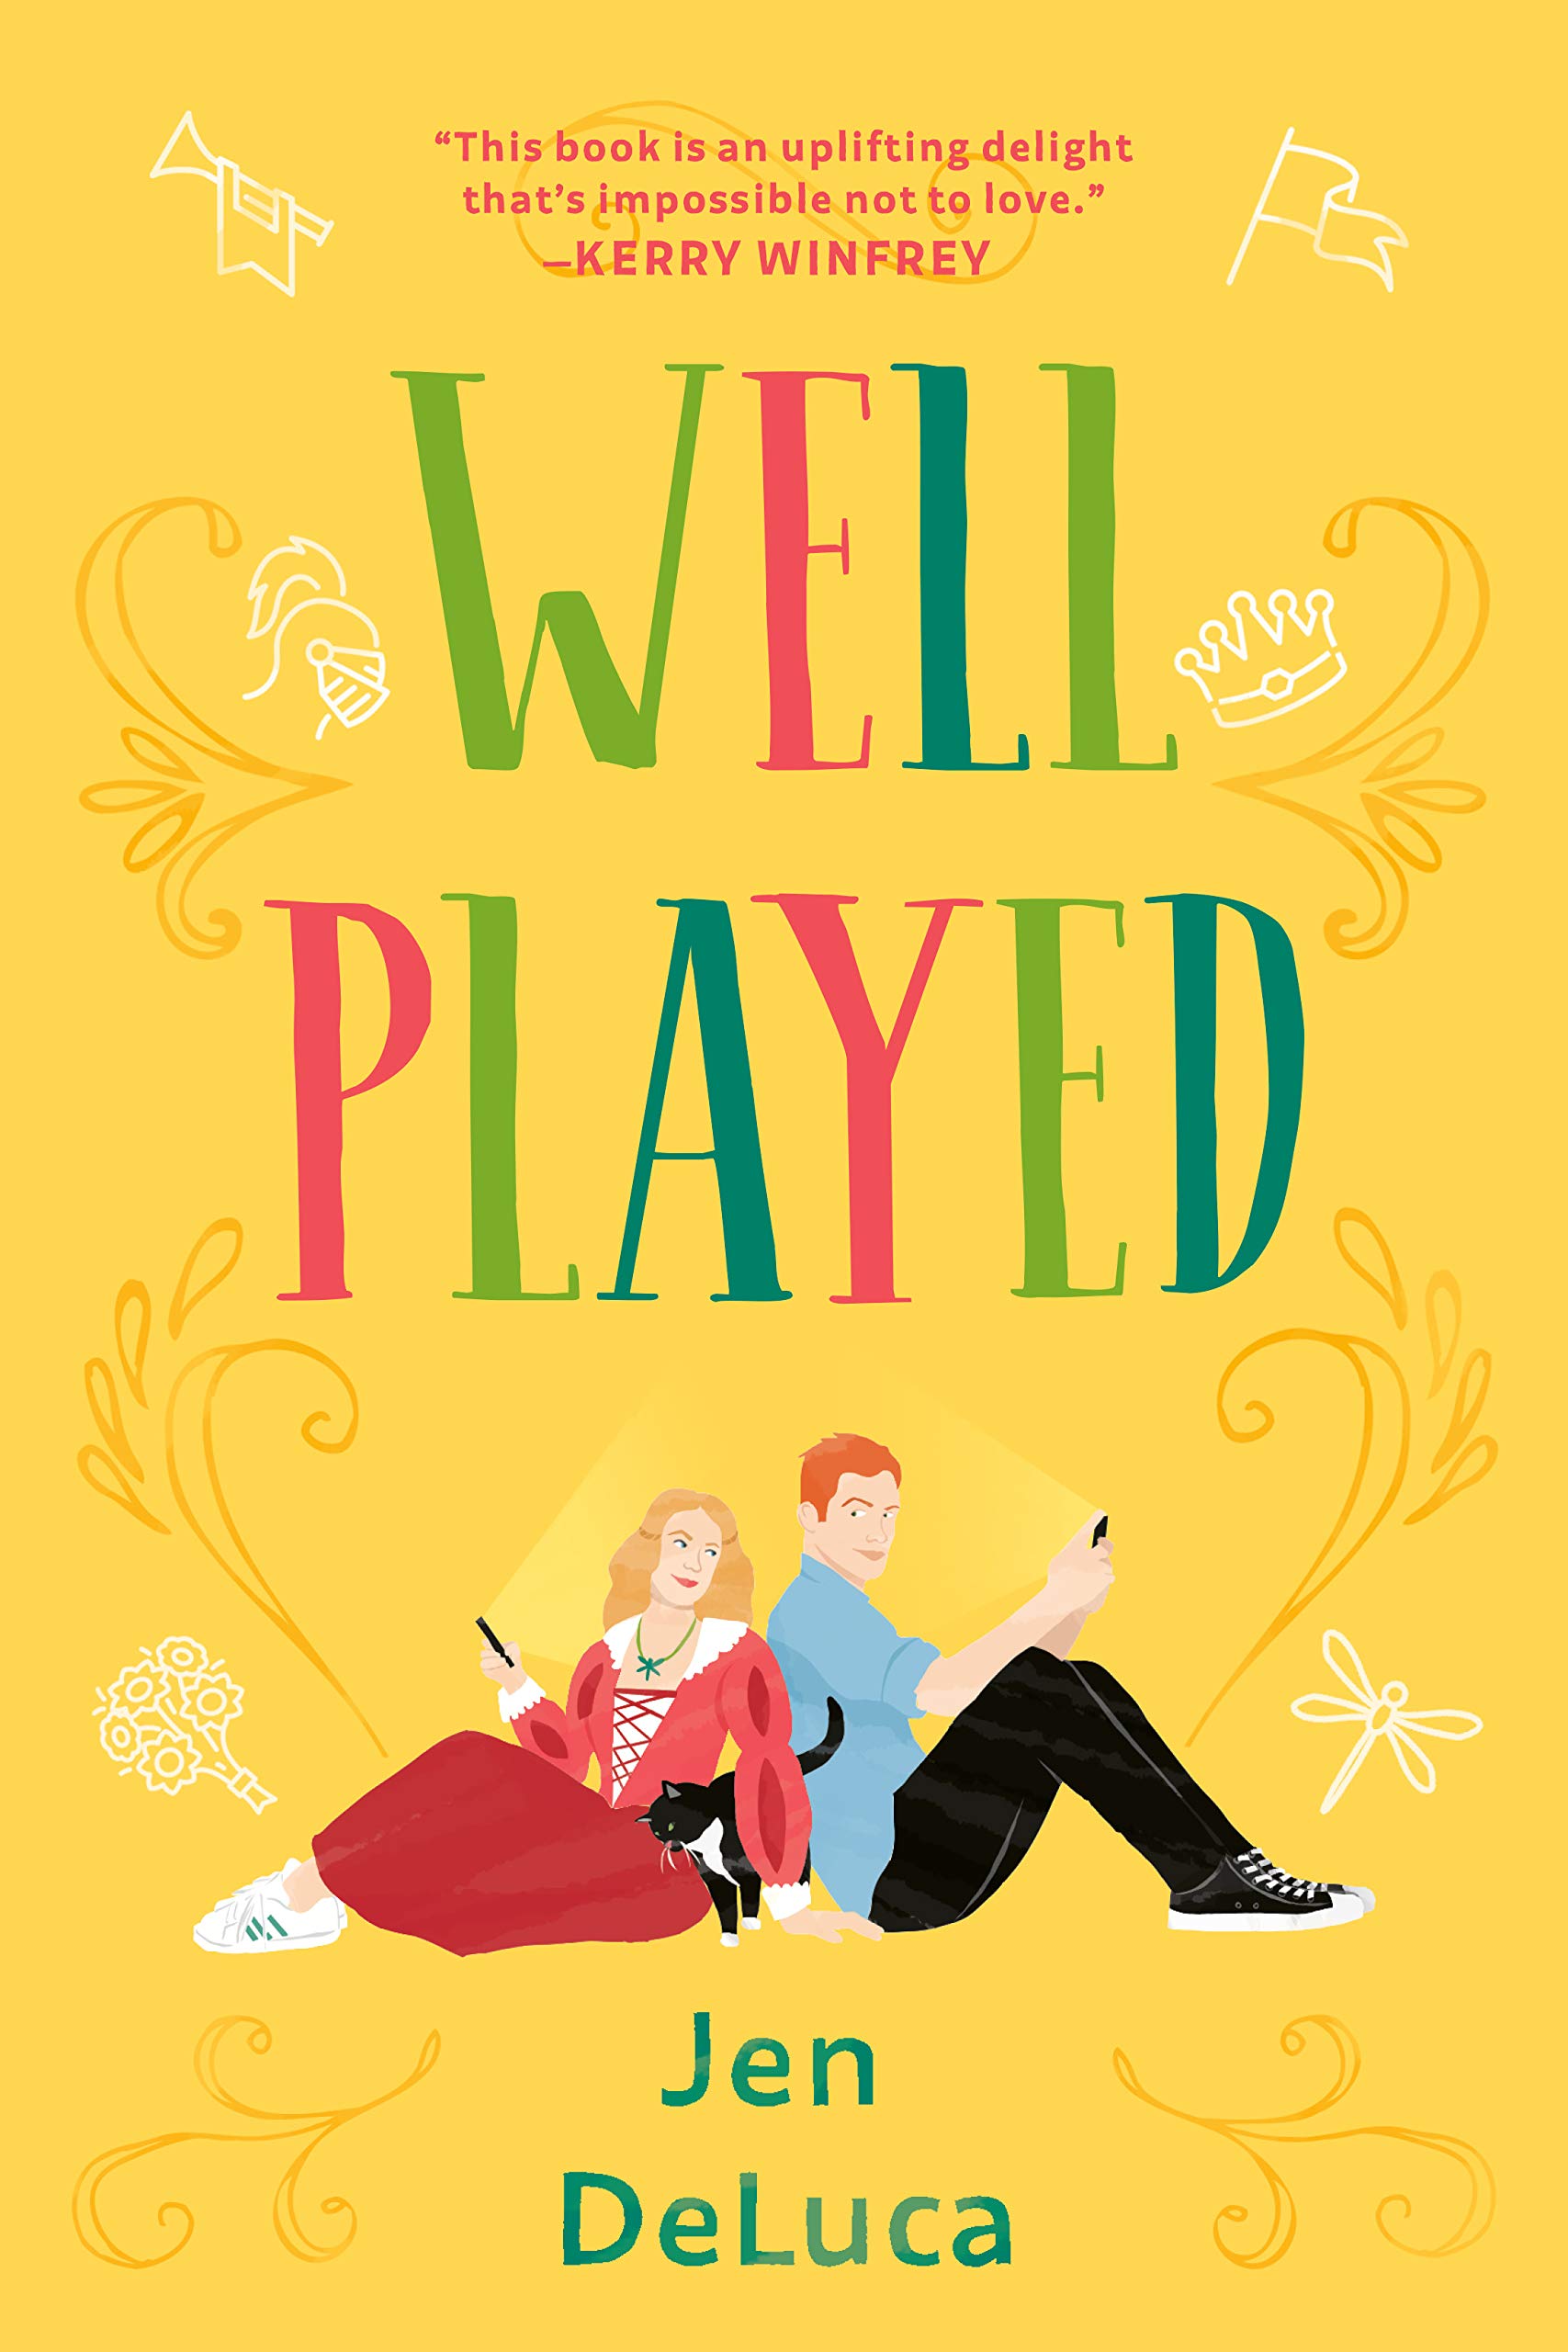 [EPUB] Well Met #2 Well Played by Jen DeLuca